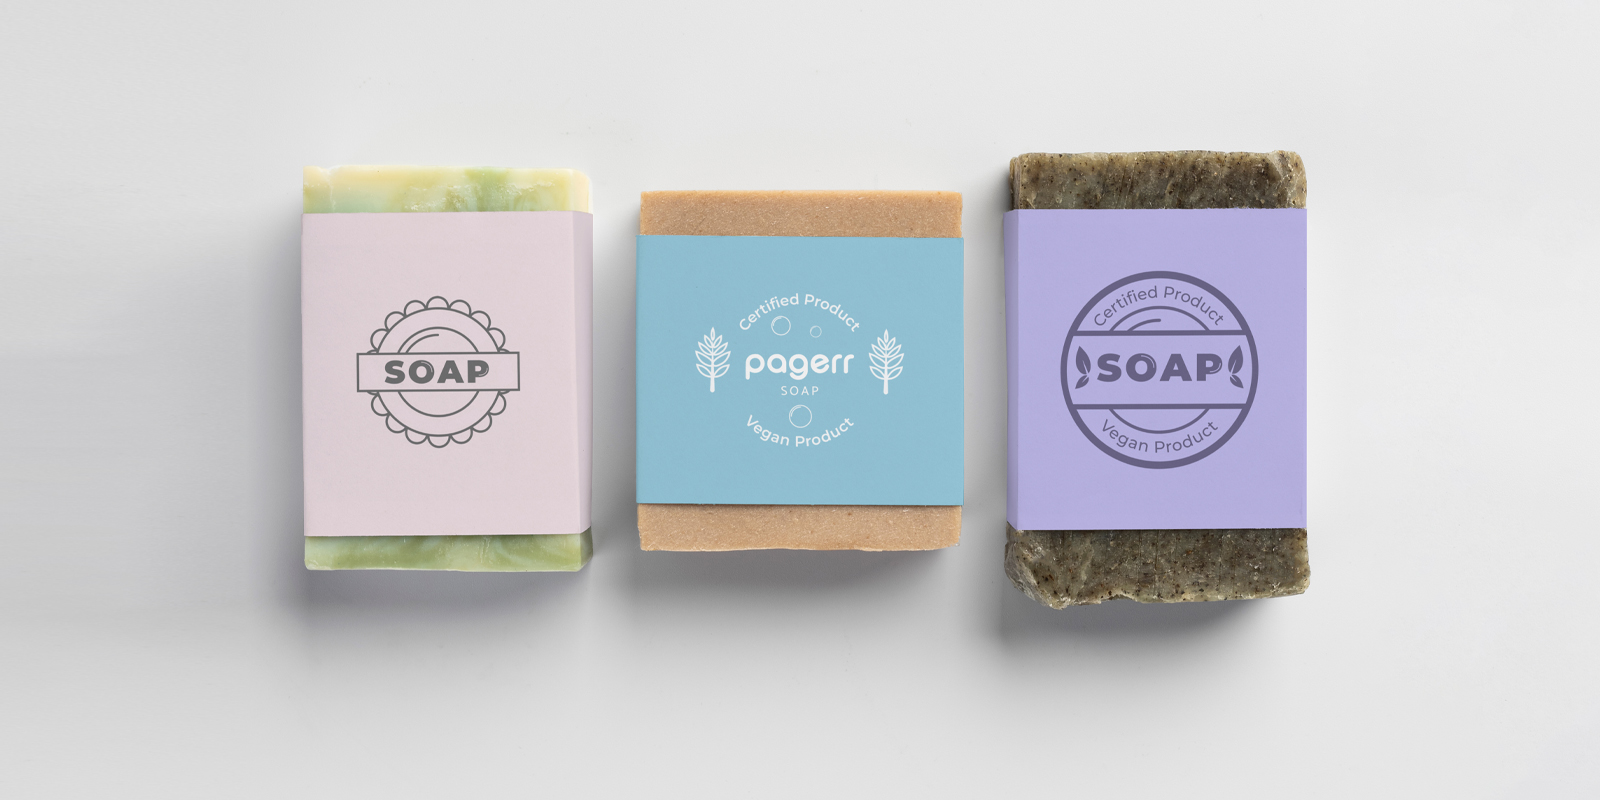 Soap labels in Warsaw - Print with Pagerr